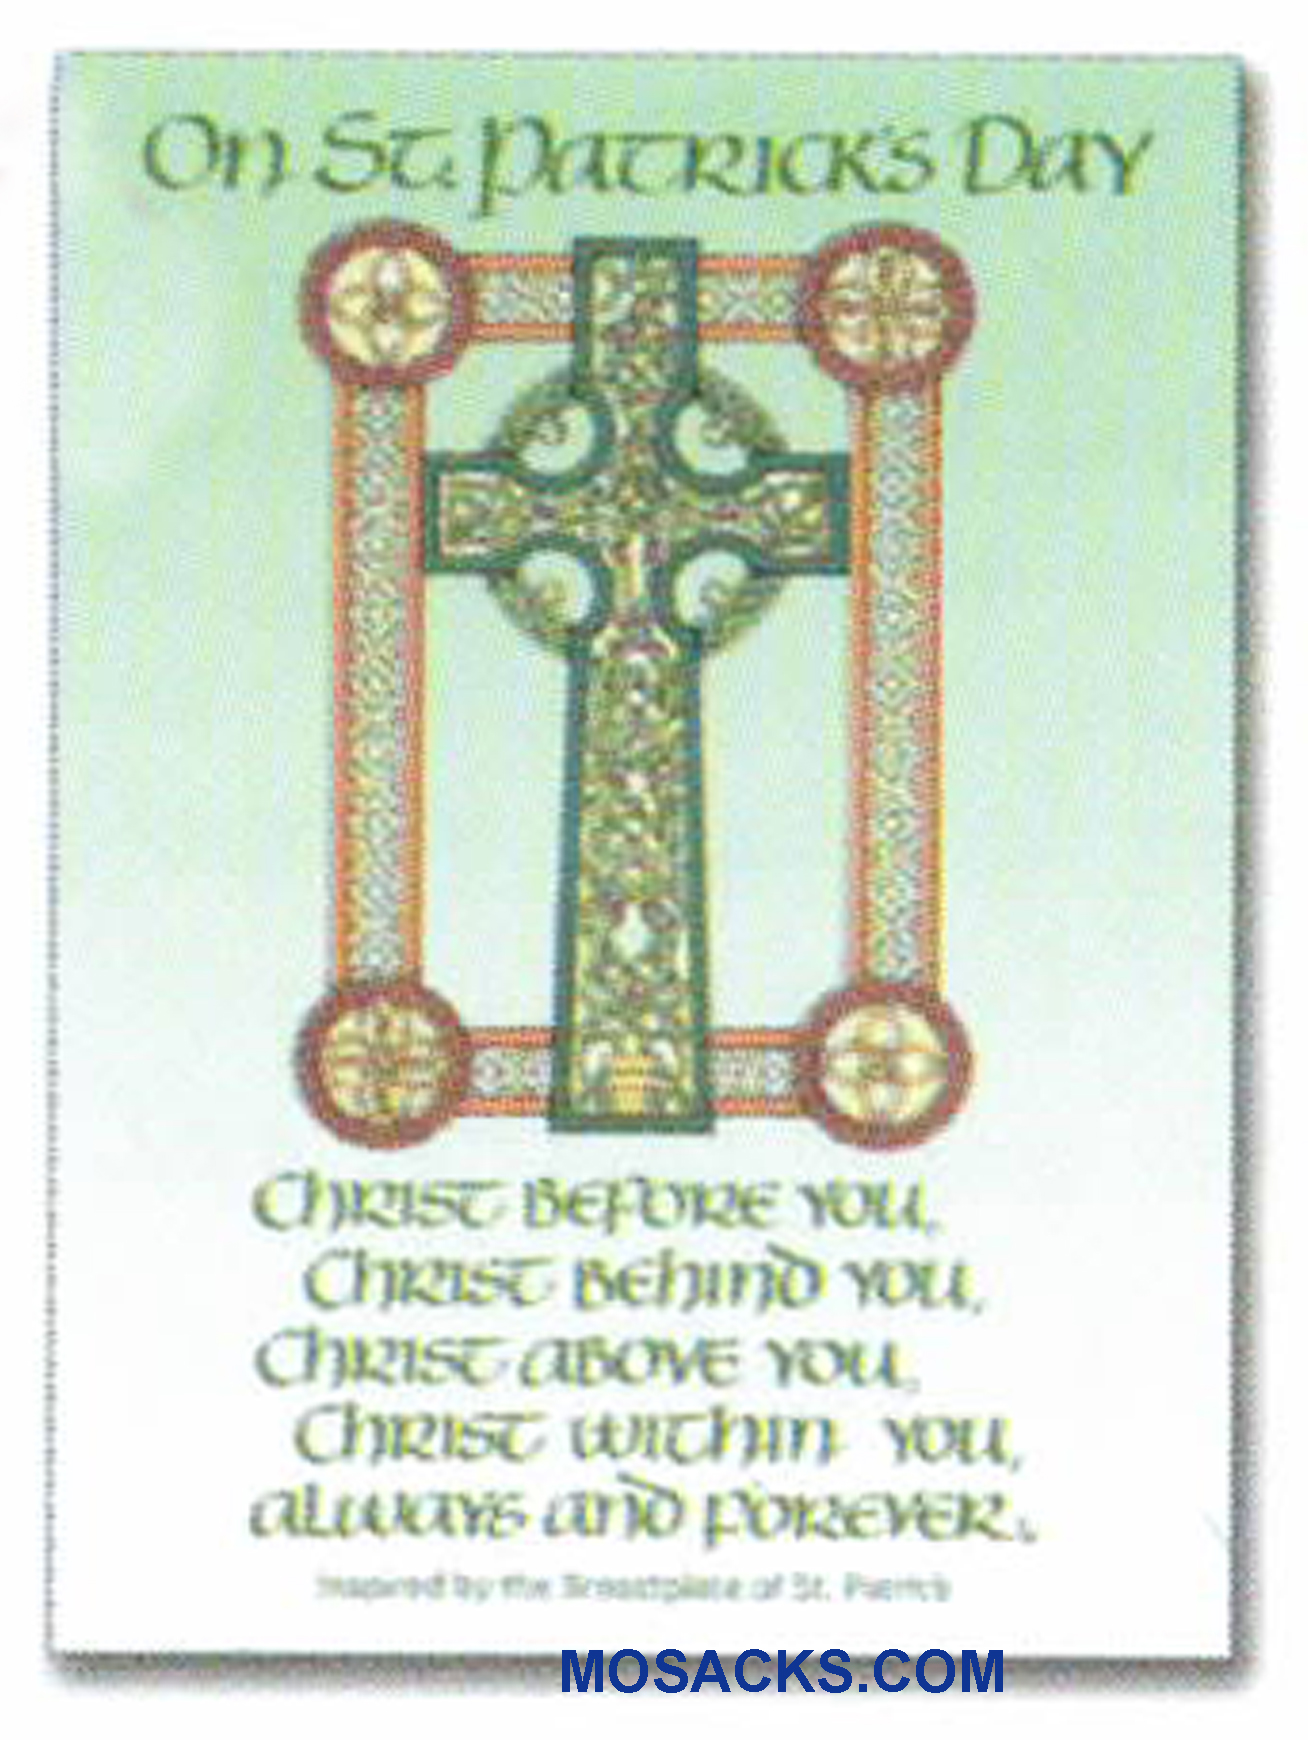 Saint Patrick's Day Greeting Card WCA8156:  On Saint Patrick's Day  Christ Before You  Christ Behind You  Christ Above You   Christ Within You  Always and Forever  Inspired by the Breastplate of St. Patrick  - WCA8156 St. Patrick's Day Greeting Card